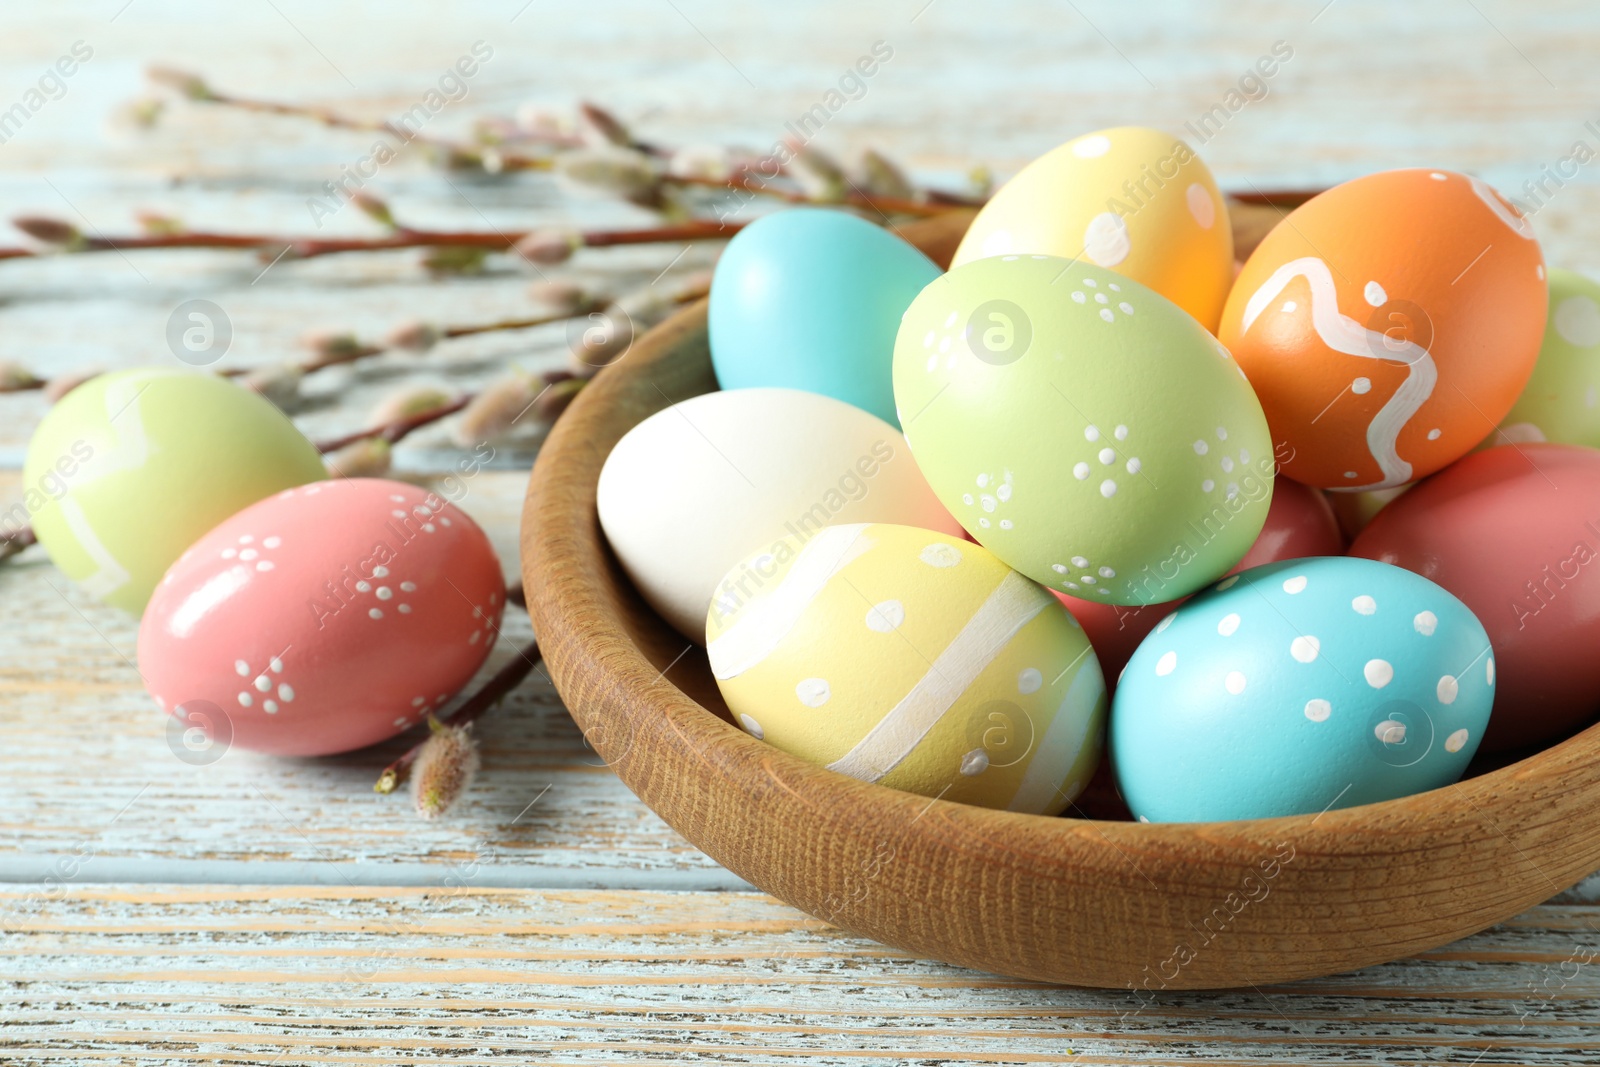 Photo of Plate with painted Easter eggs on wooden table